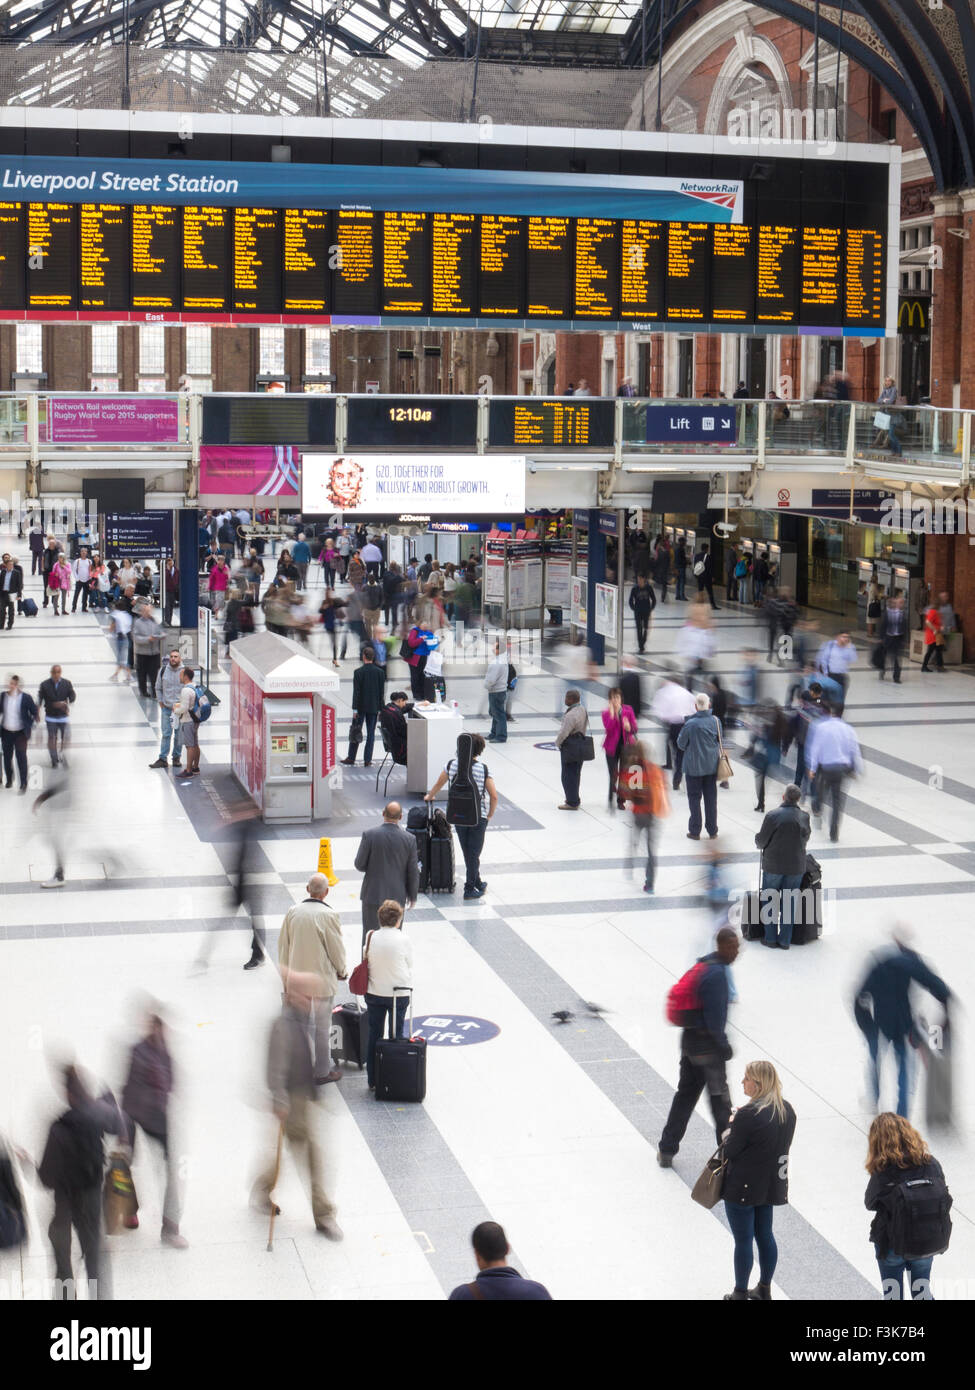 Liverpool street station in london rush hour Stock Photo